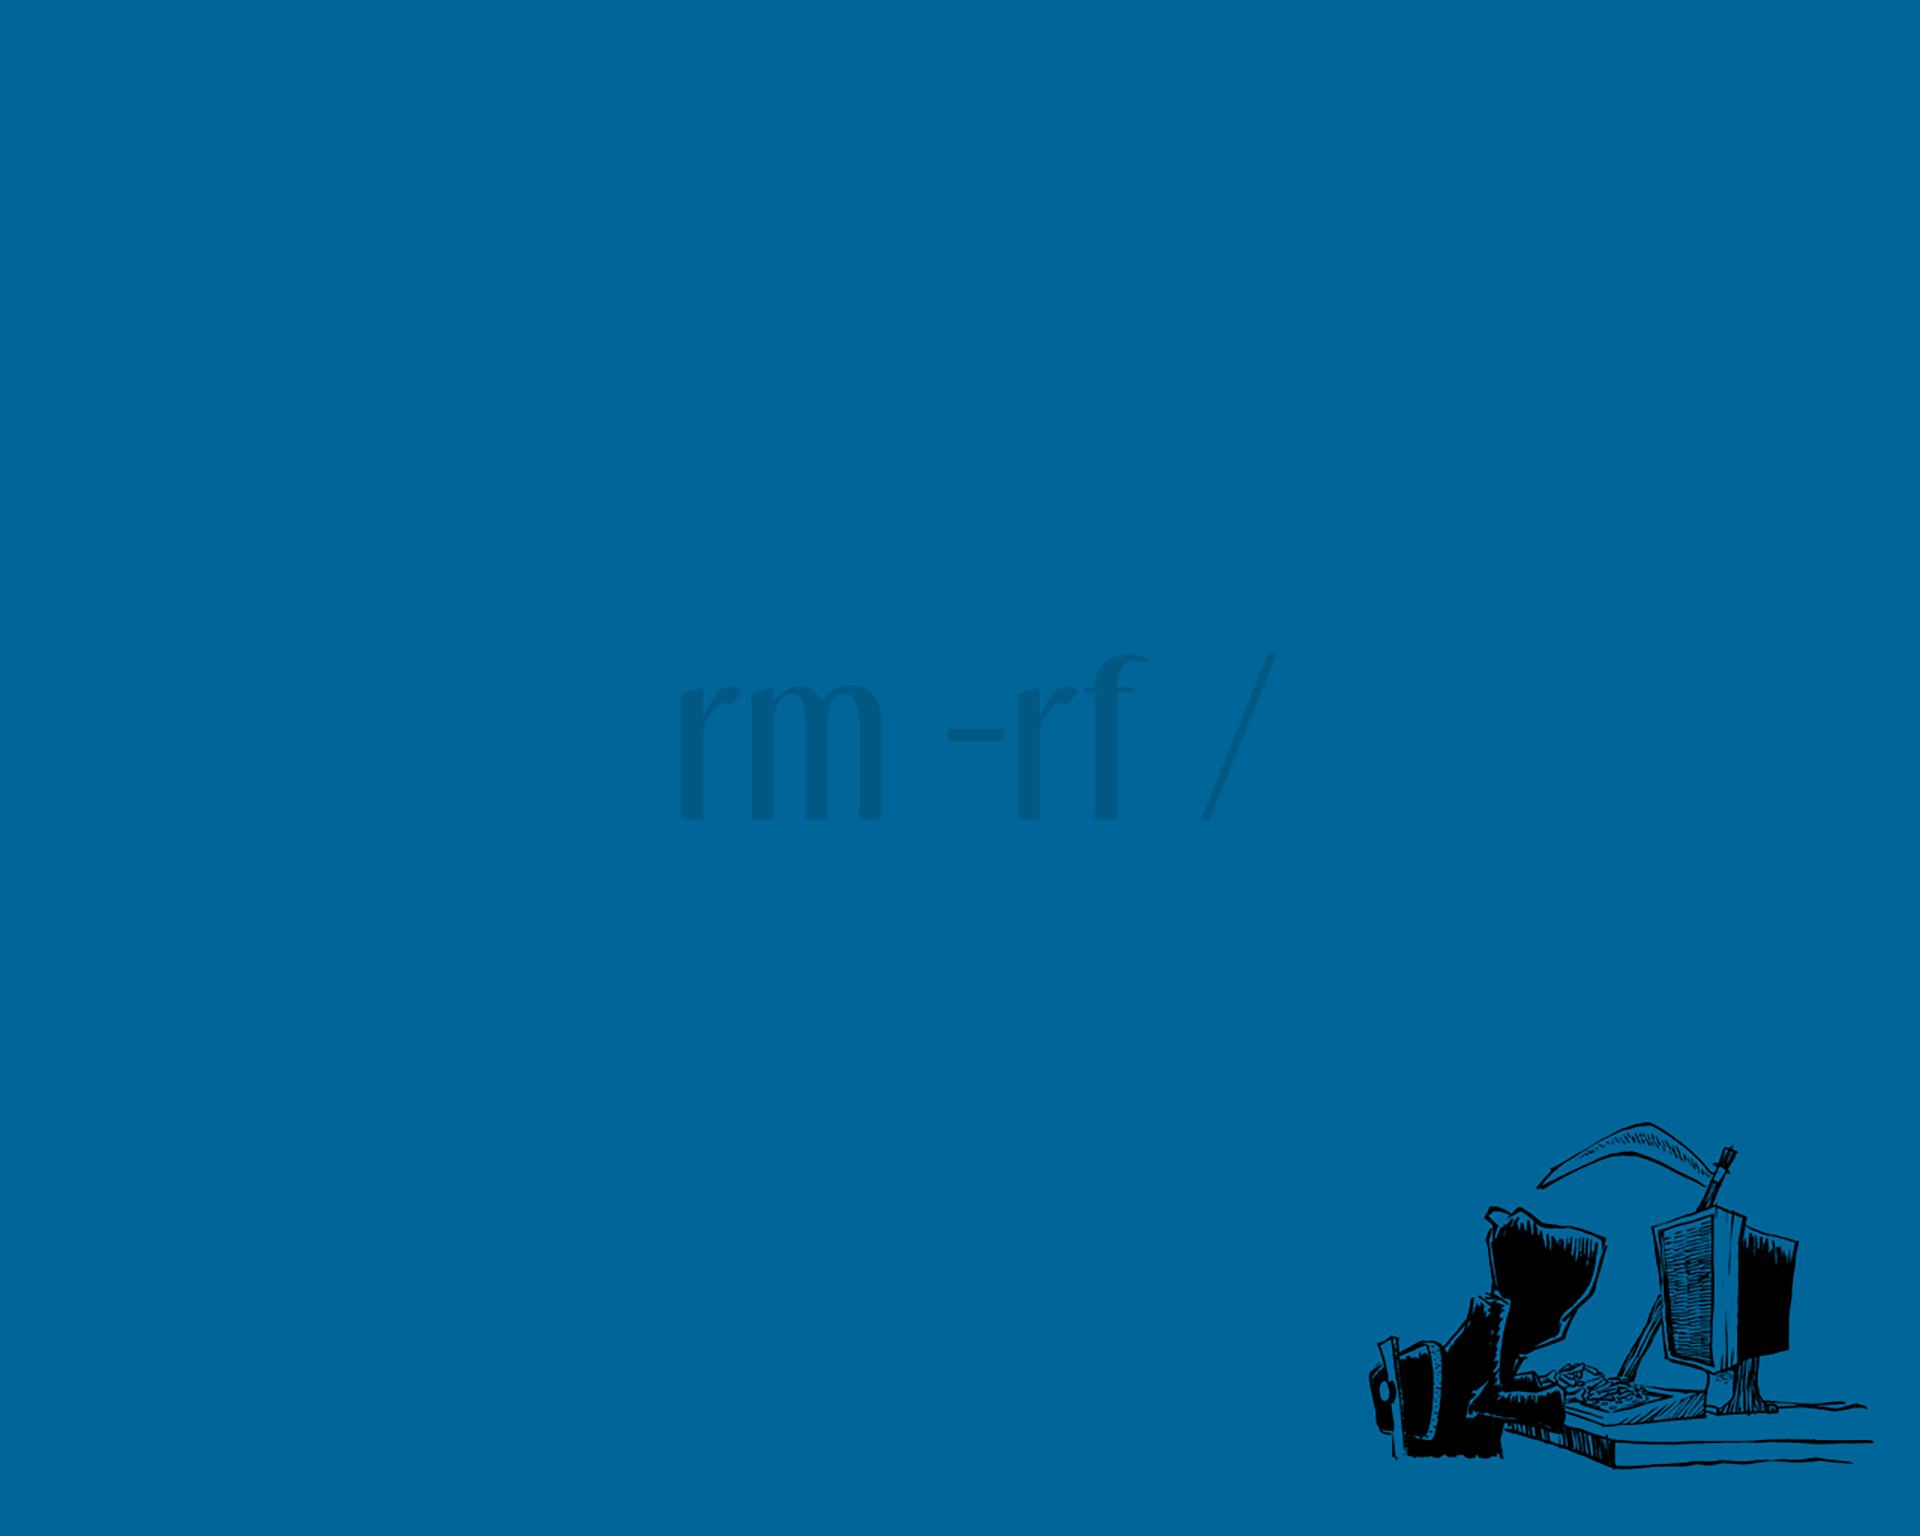 General 1920x1536 command lines hacking Grim Reaper humor scythe blue background simple background minimalism